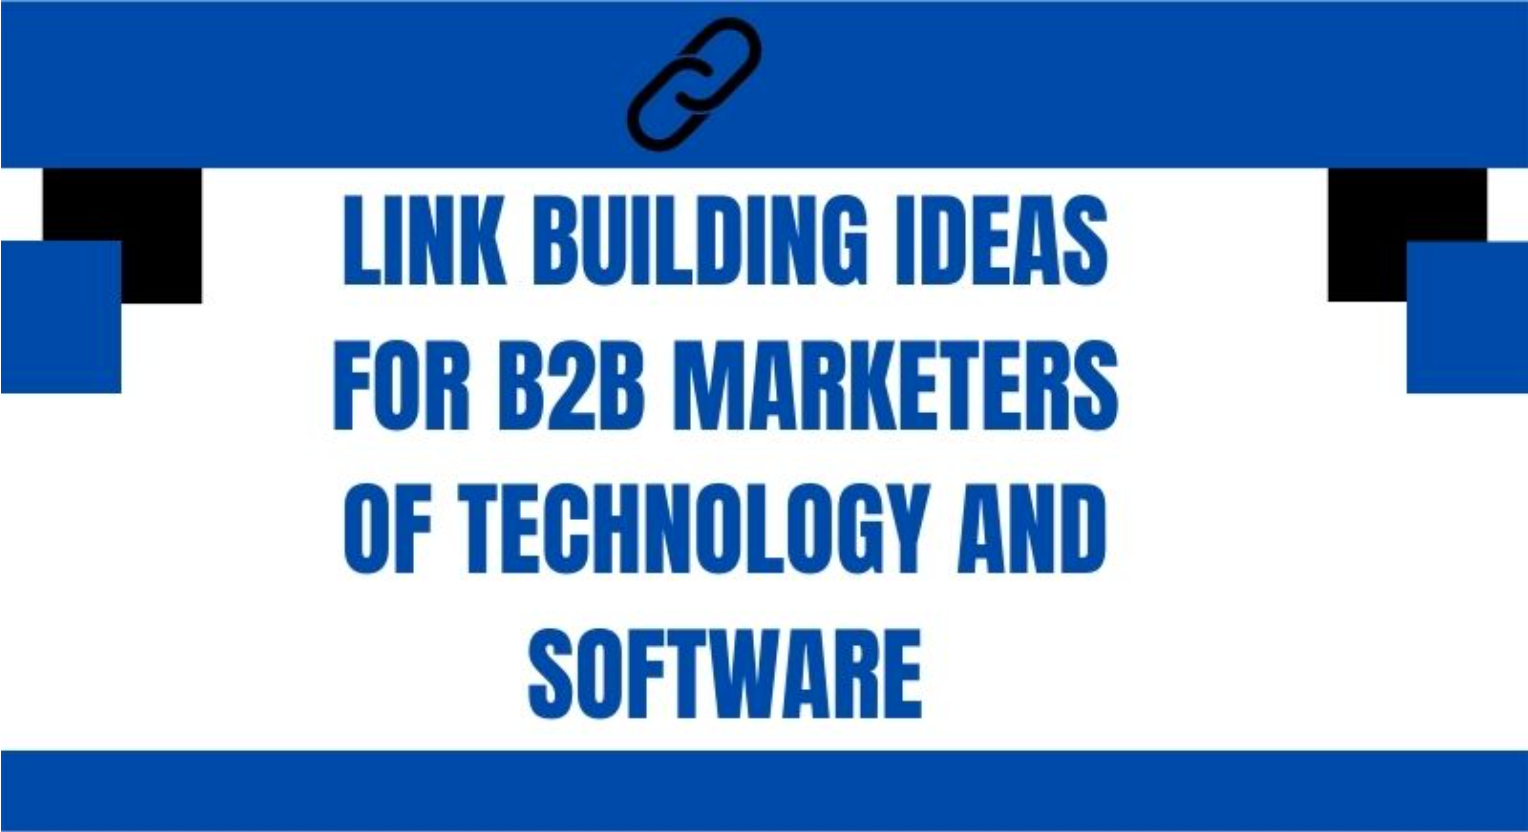 Link Building Ideas for B2B Marketers of Technology and Software